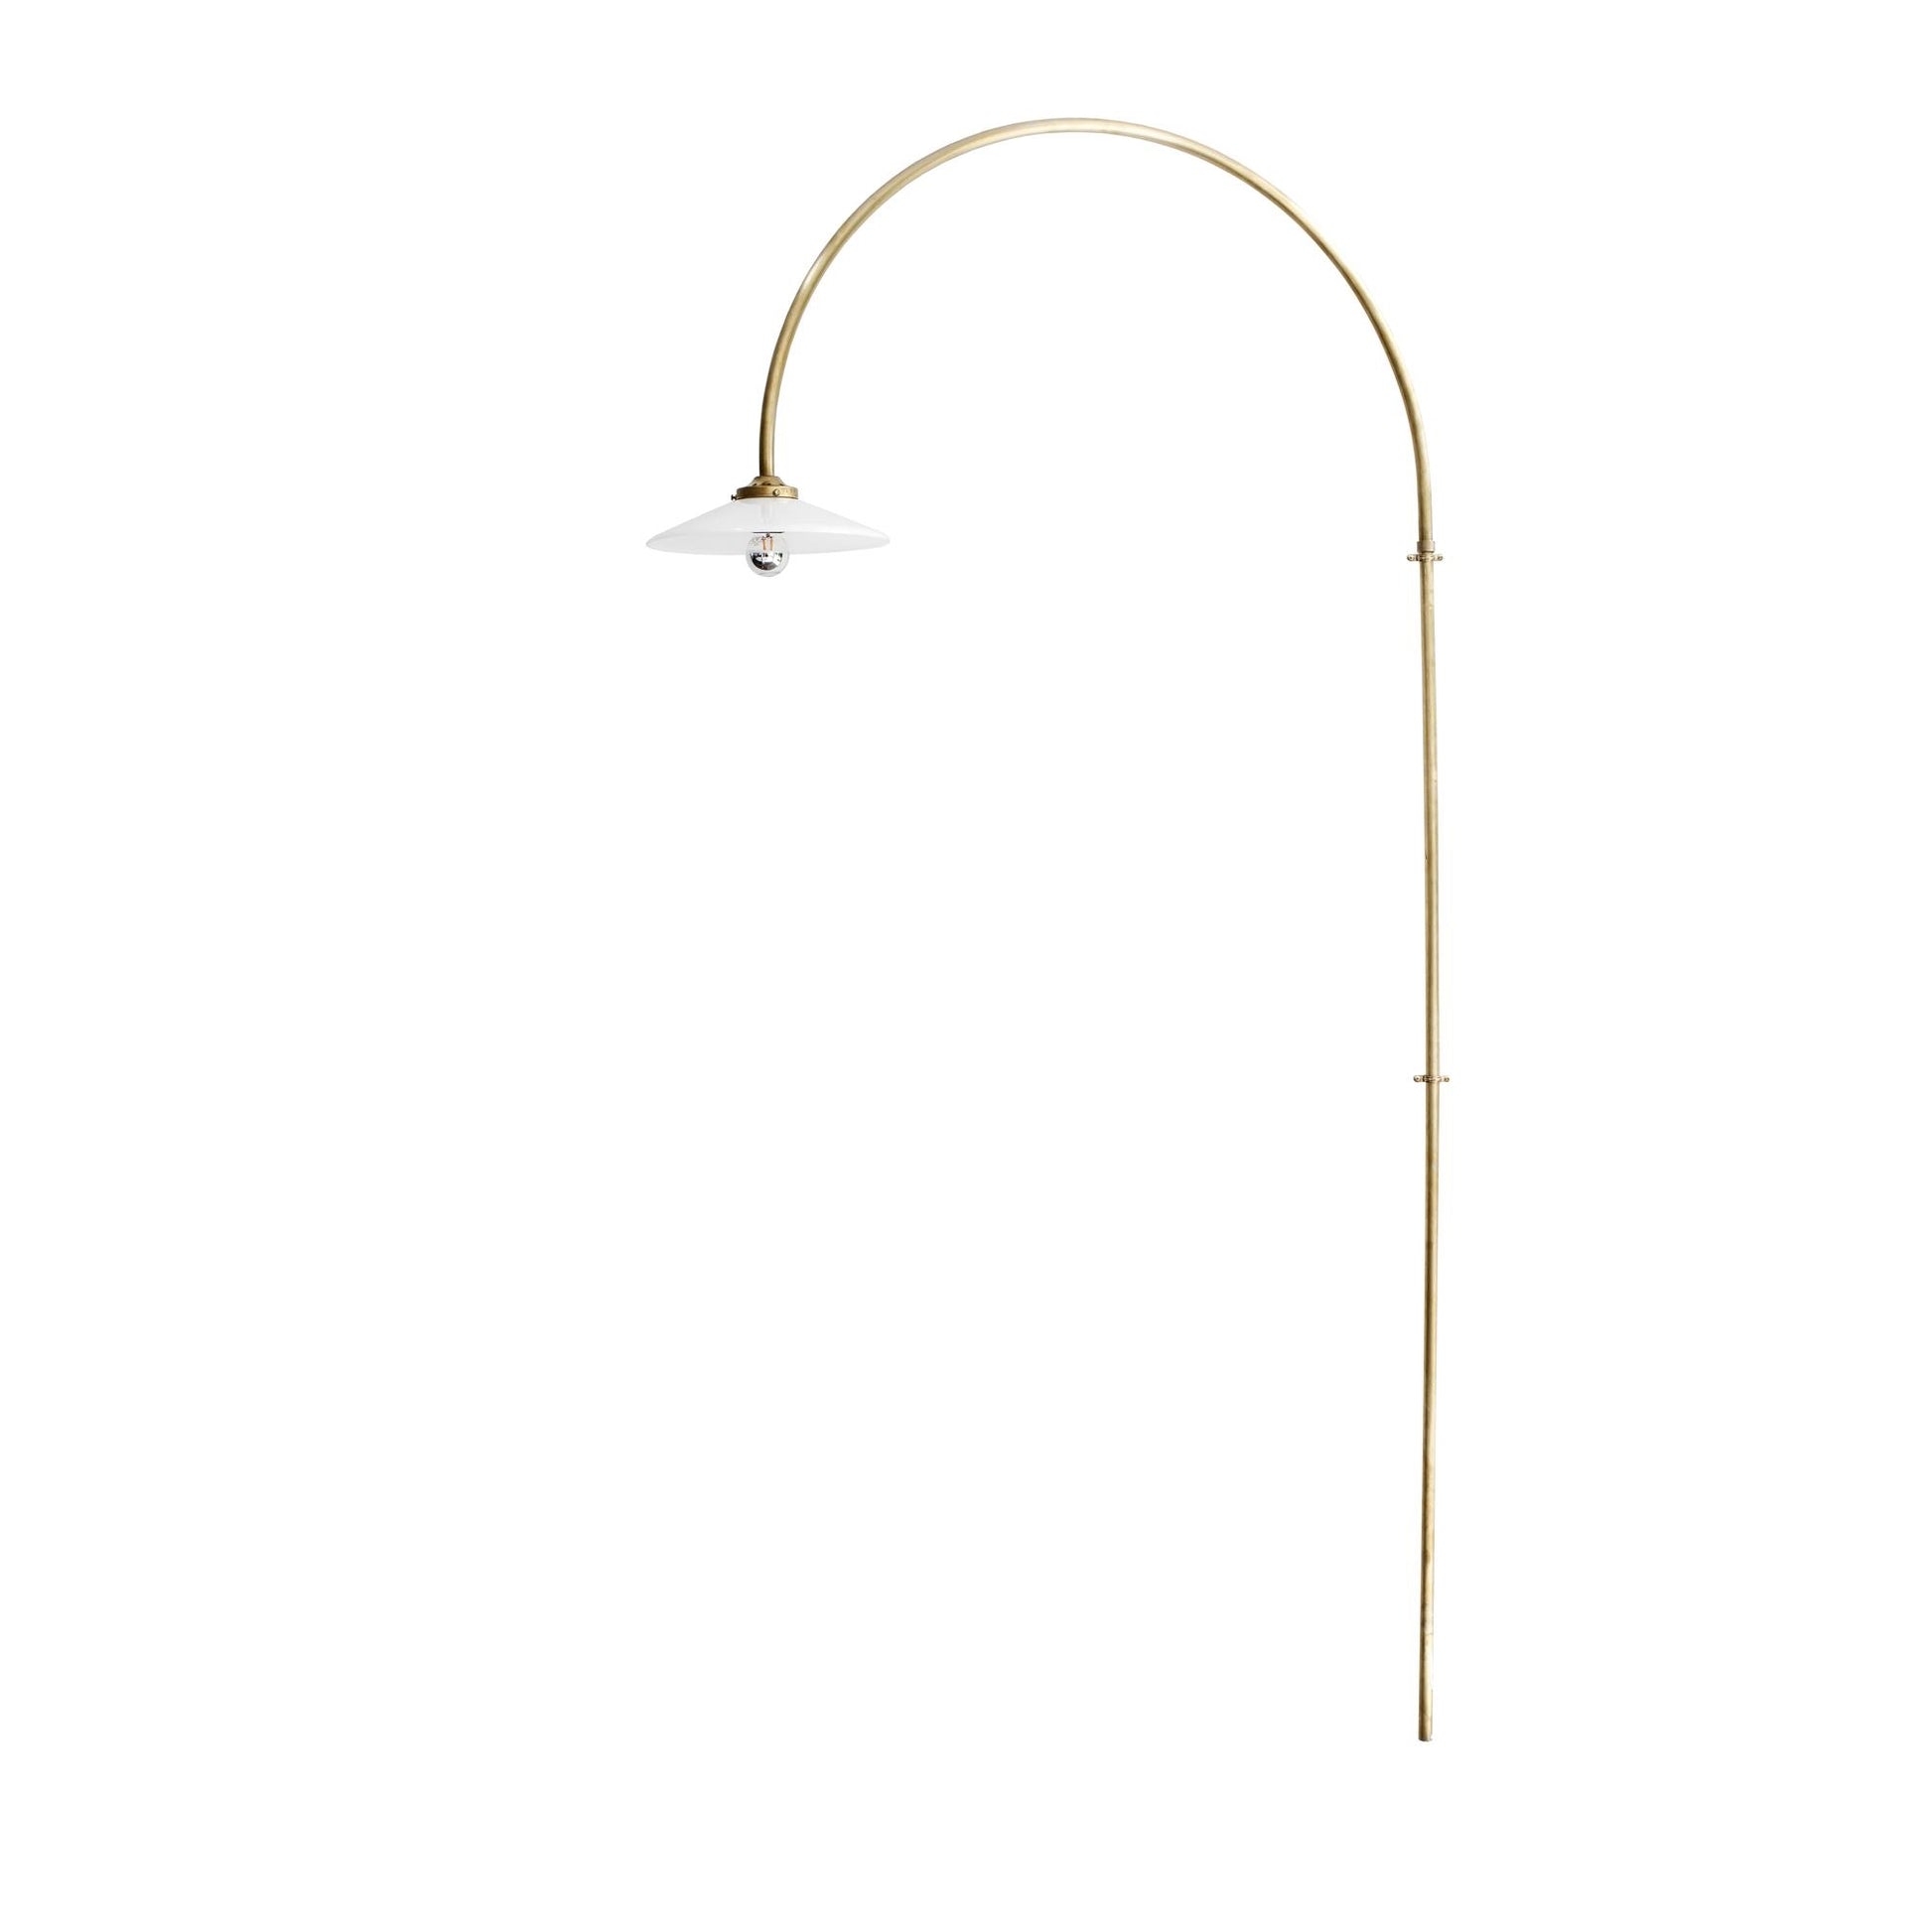 Hanging Lamp N°2 Wall Lamp by Valerie Objects #Brass